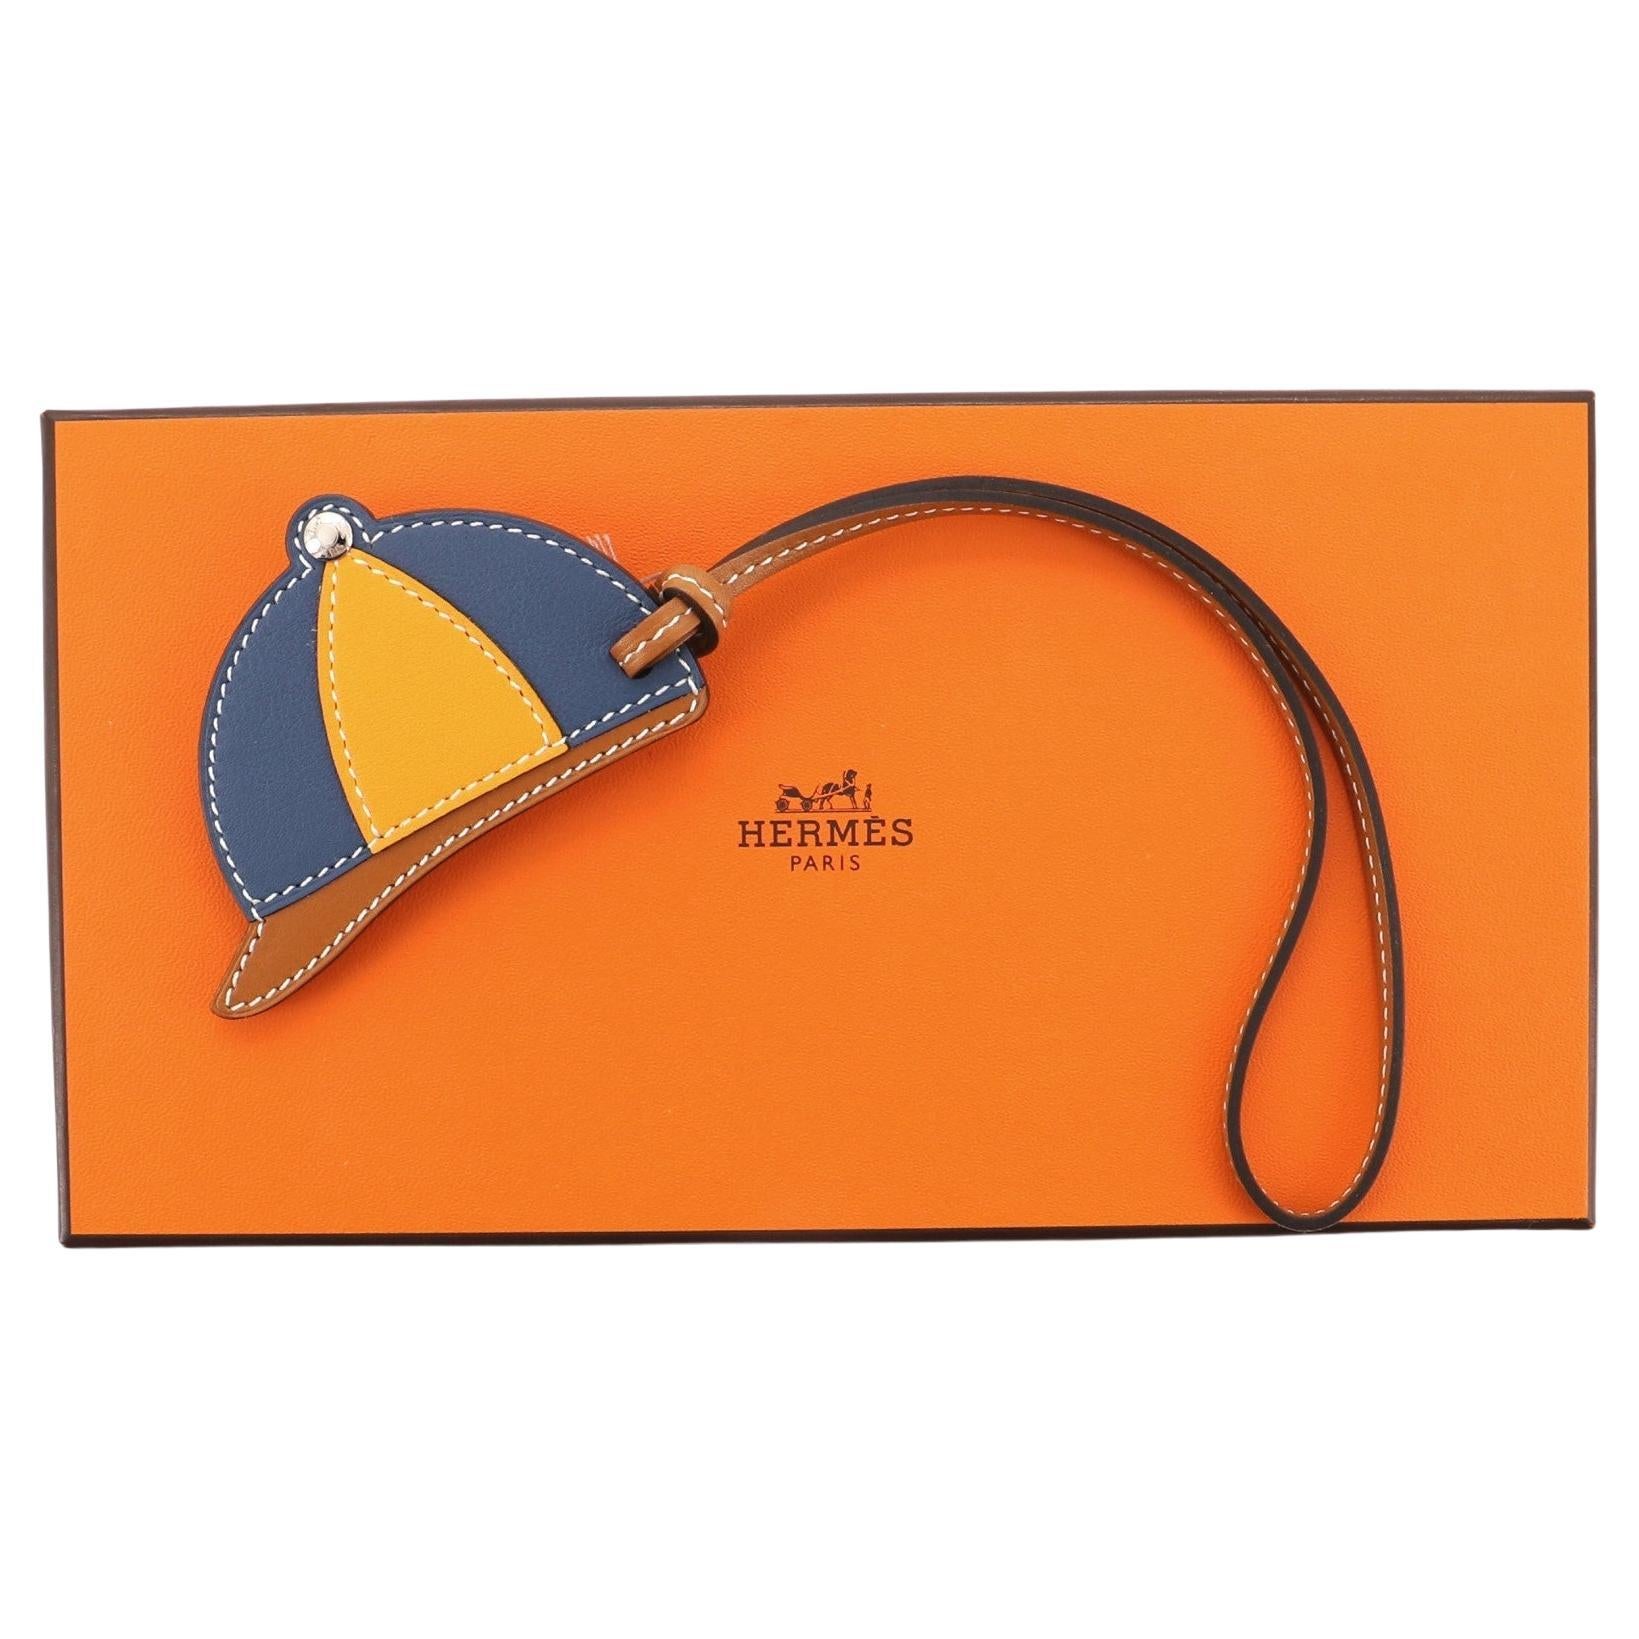 Hermes Paddock Bombe Bag Charm Leather Blue Yellow Leather  Condition Details: 